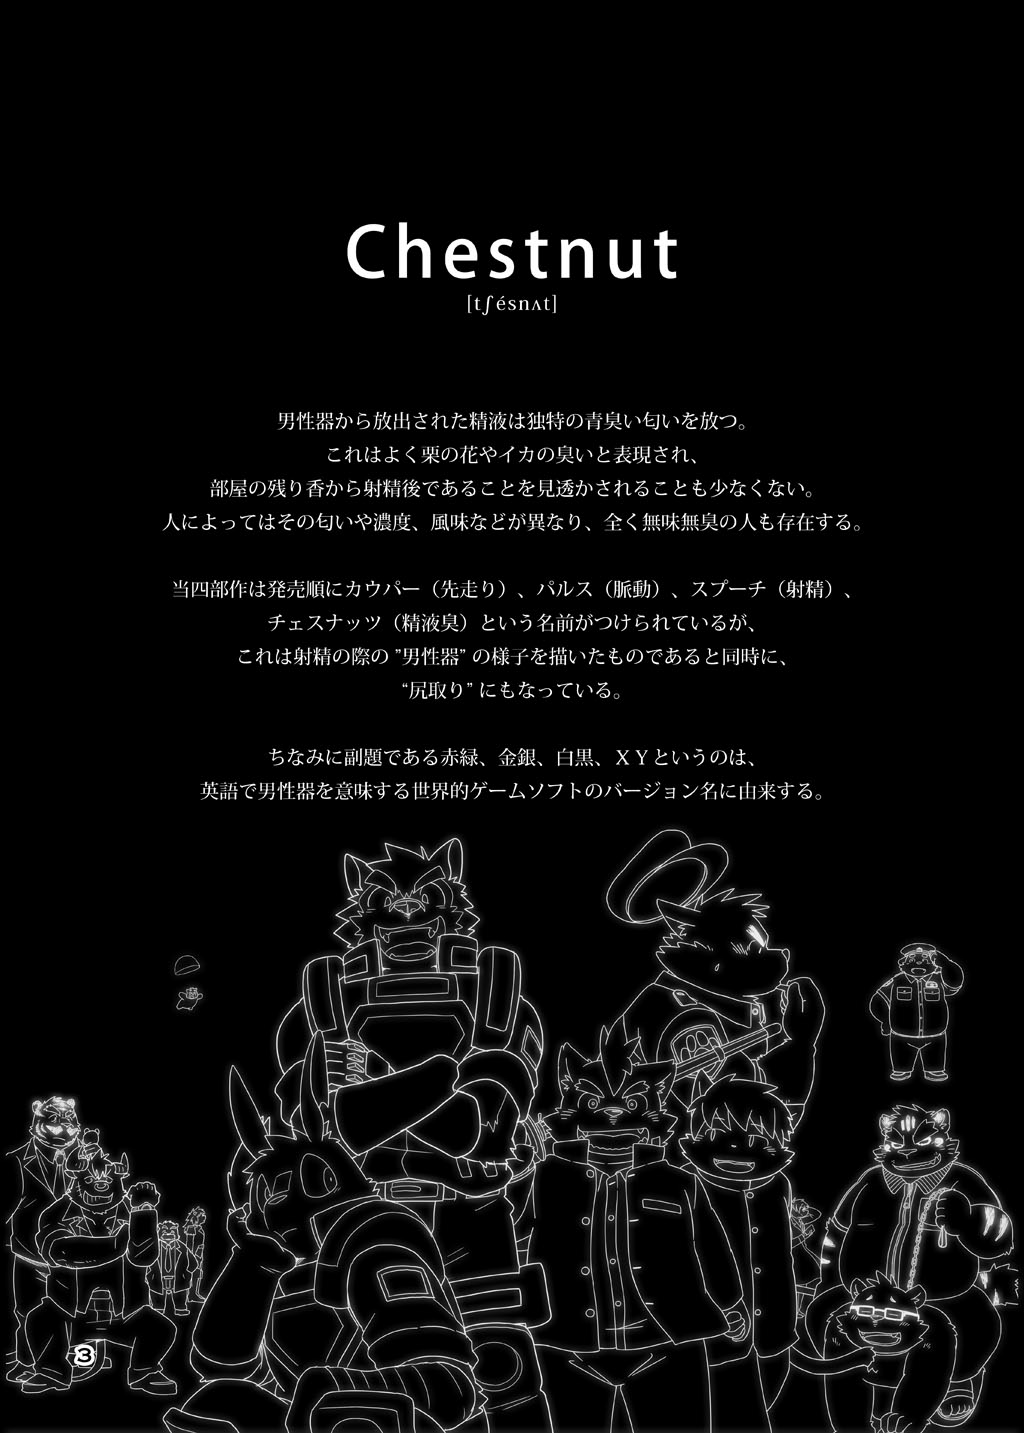 (C86) [FCLG (Cheshire, Jiroh)] Chestnuts!!!! The Finish (C86) [FCLG (小倉チェシャ, 次郎)] チェスナッツ!!!! the finish